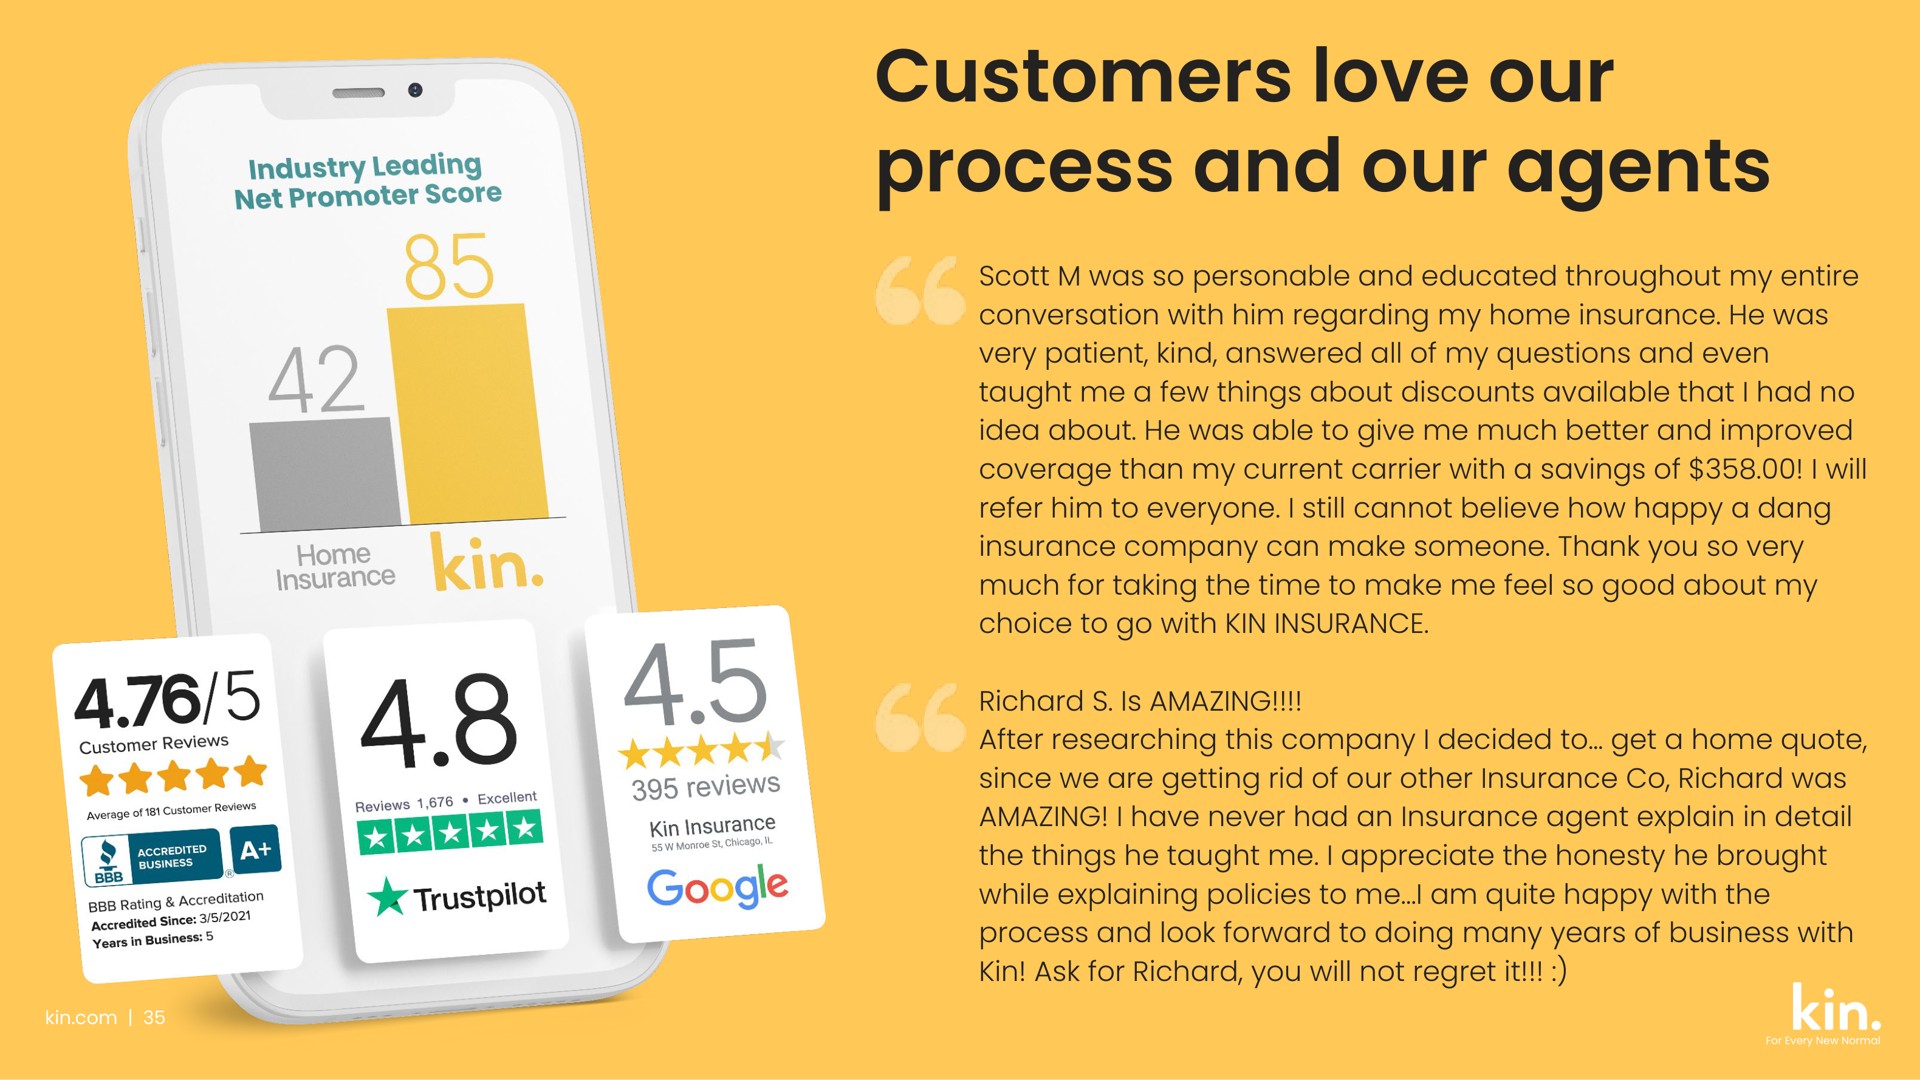 customers love our process and our agents eseseses | Kin